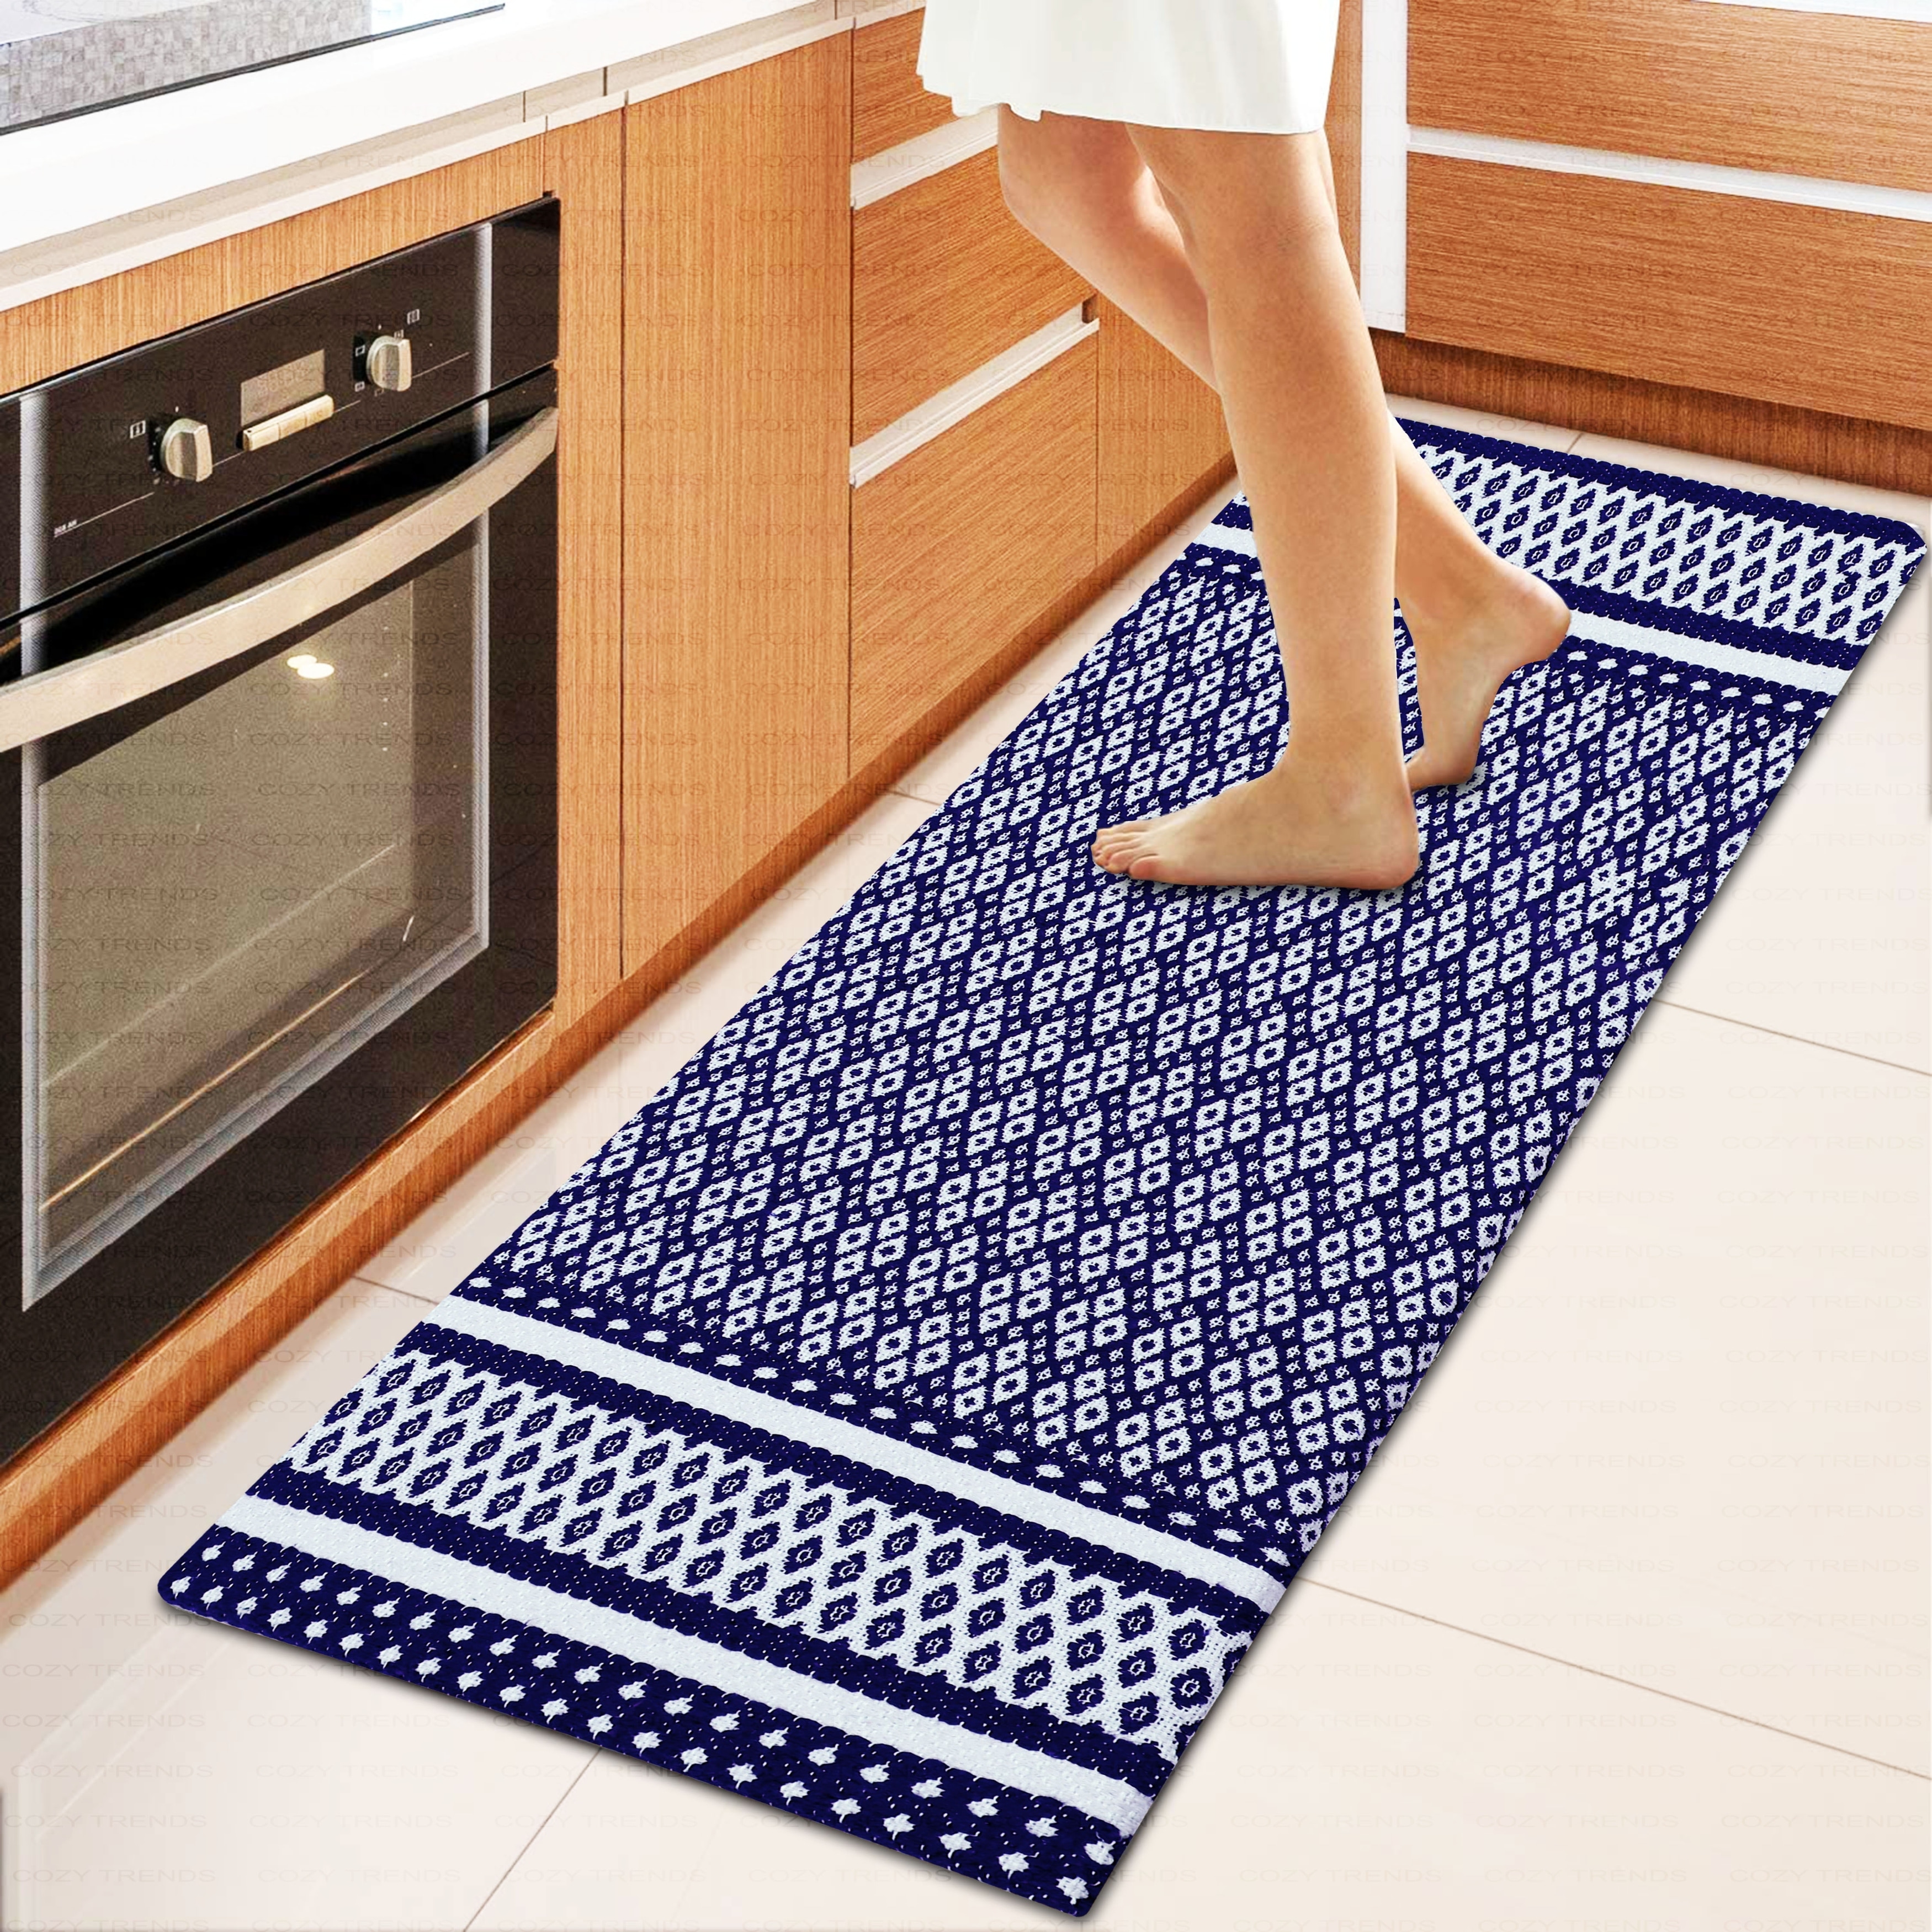 https://ak1.ostkcdn.com/images/products/is/images/direct/b4136c92e9807b3ebaebe5988a3610c8f0e22f9d/Kitchen-Runner-Rug--Mat-Cushioned-Cotton-Hand-Woven-Anti-Fatigue-Mat-Kitchen-Bathroom-Bed-side-18x48%27%27.jpg